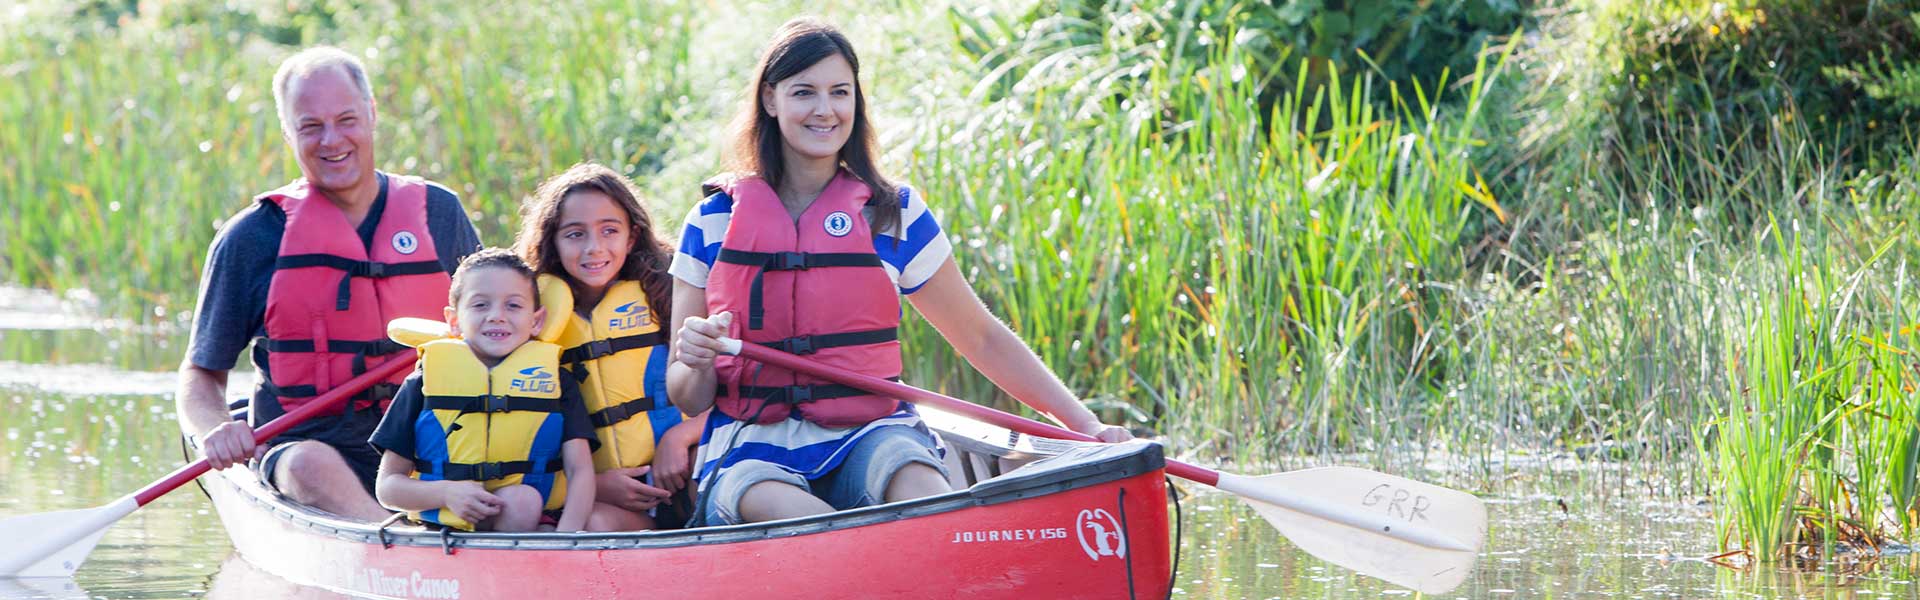 Family Canoe trips on the Grand River with Grand River Rafting